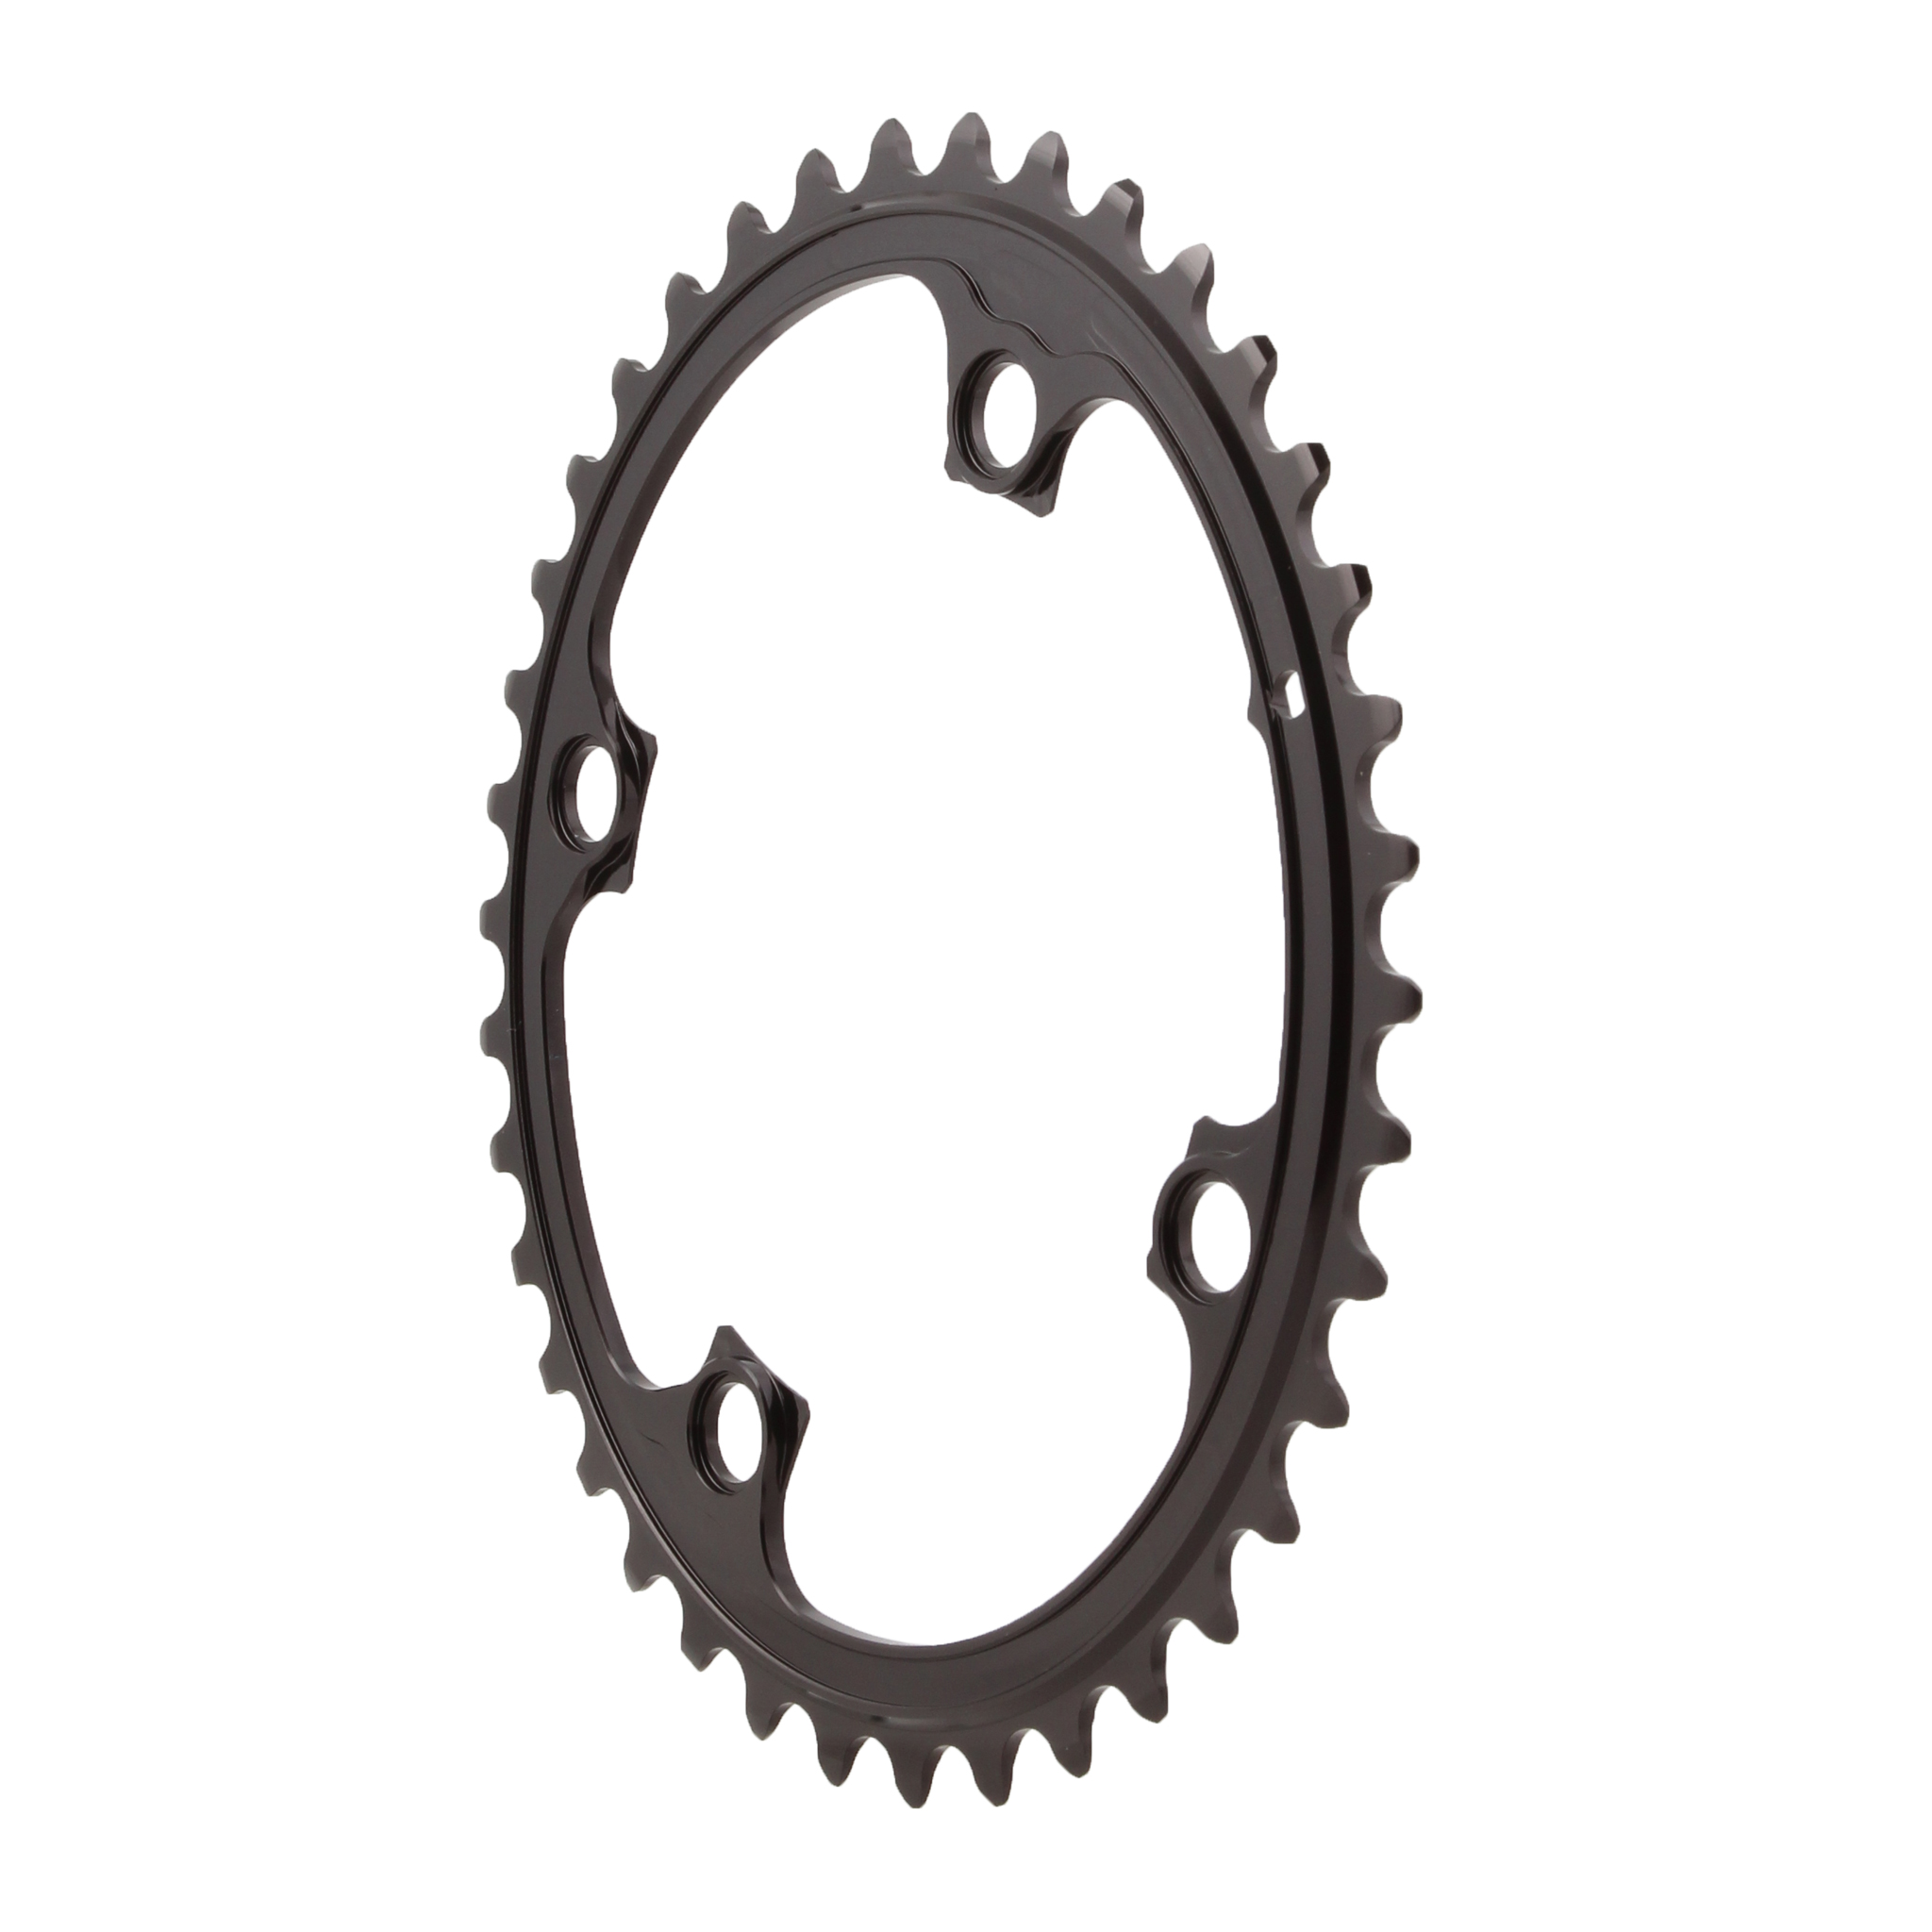 Absolute Black FSA ABS Oval Chainrings 4&5x110BCD 38T - Black